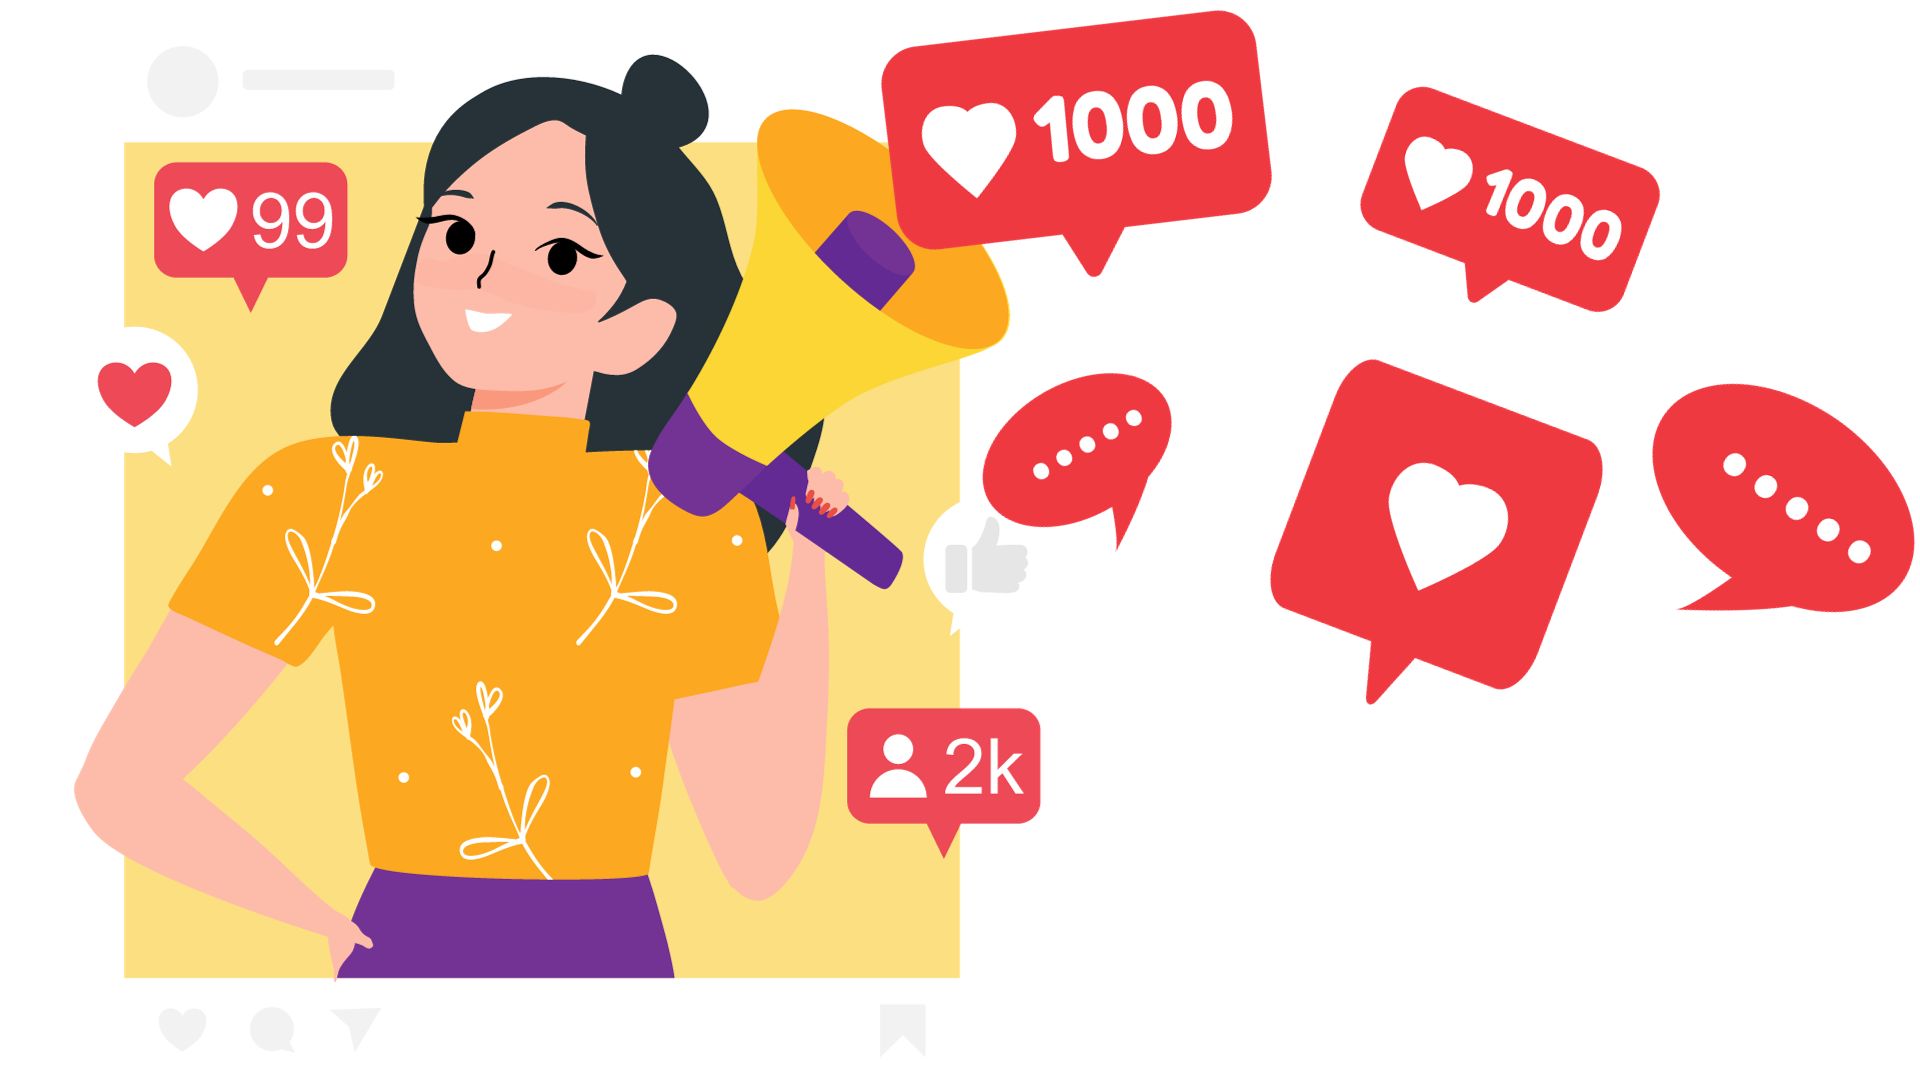 graphics of a cartoon woman surrounded by red graphics with social media likes, comments and engagement icons